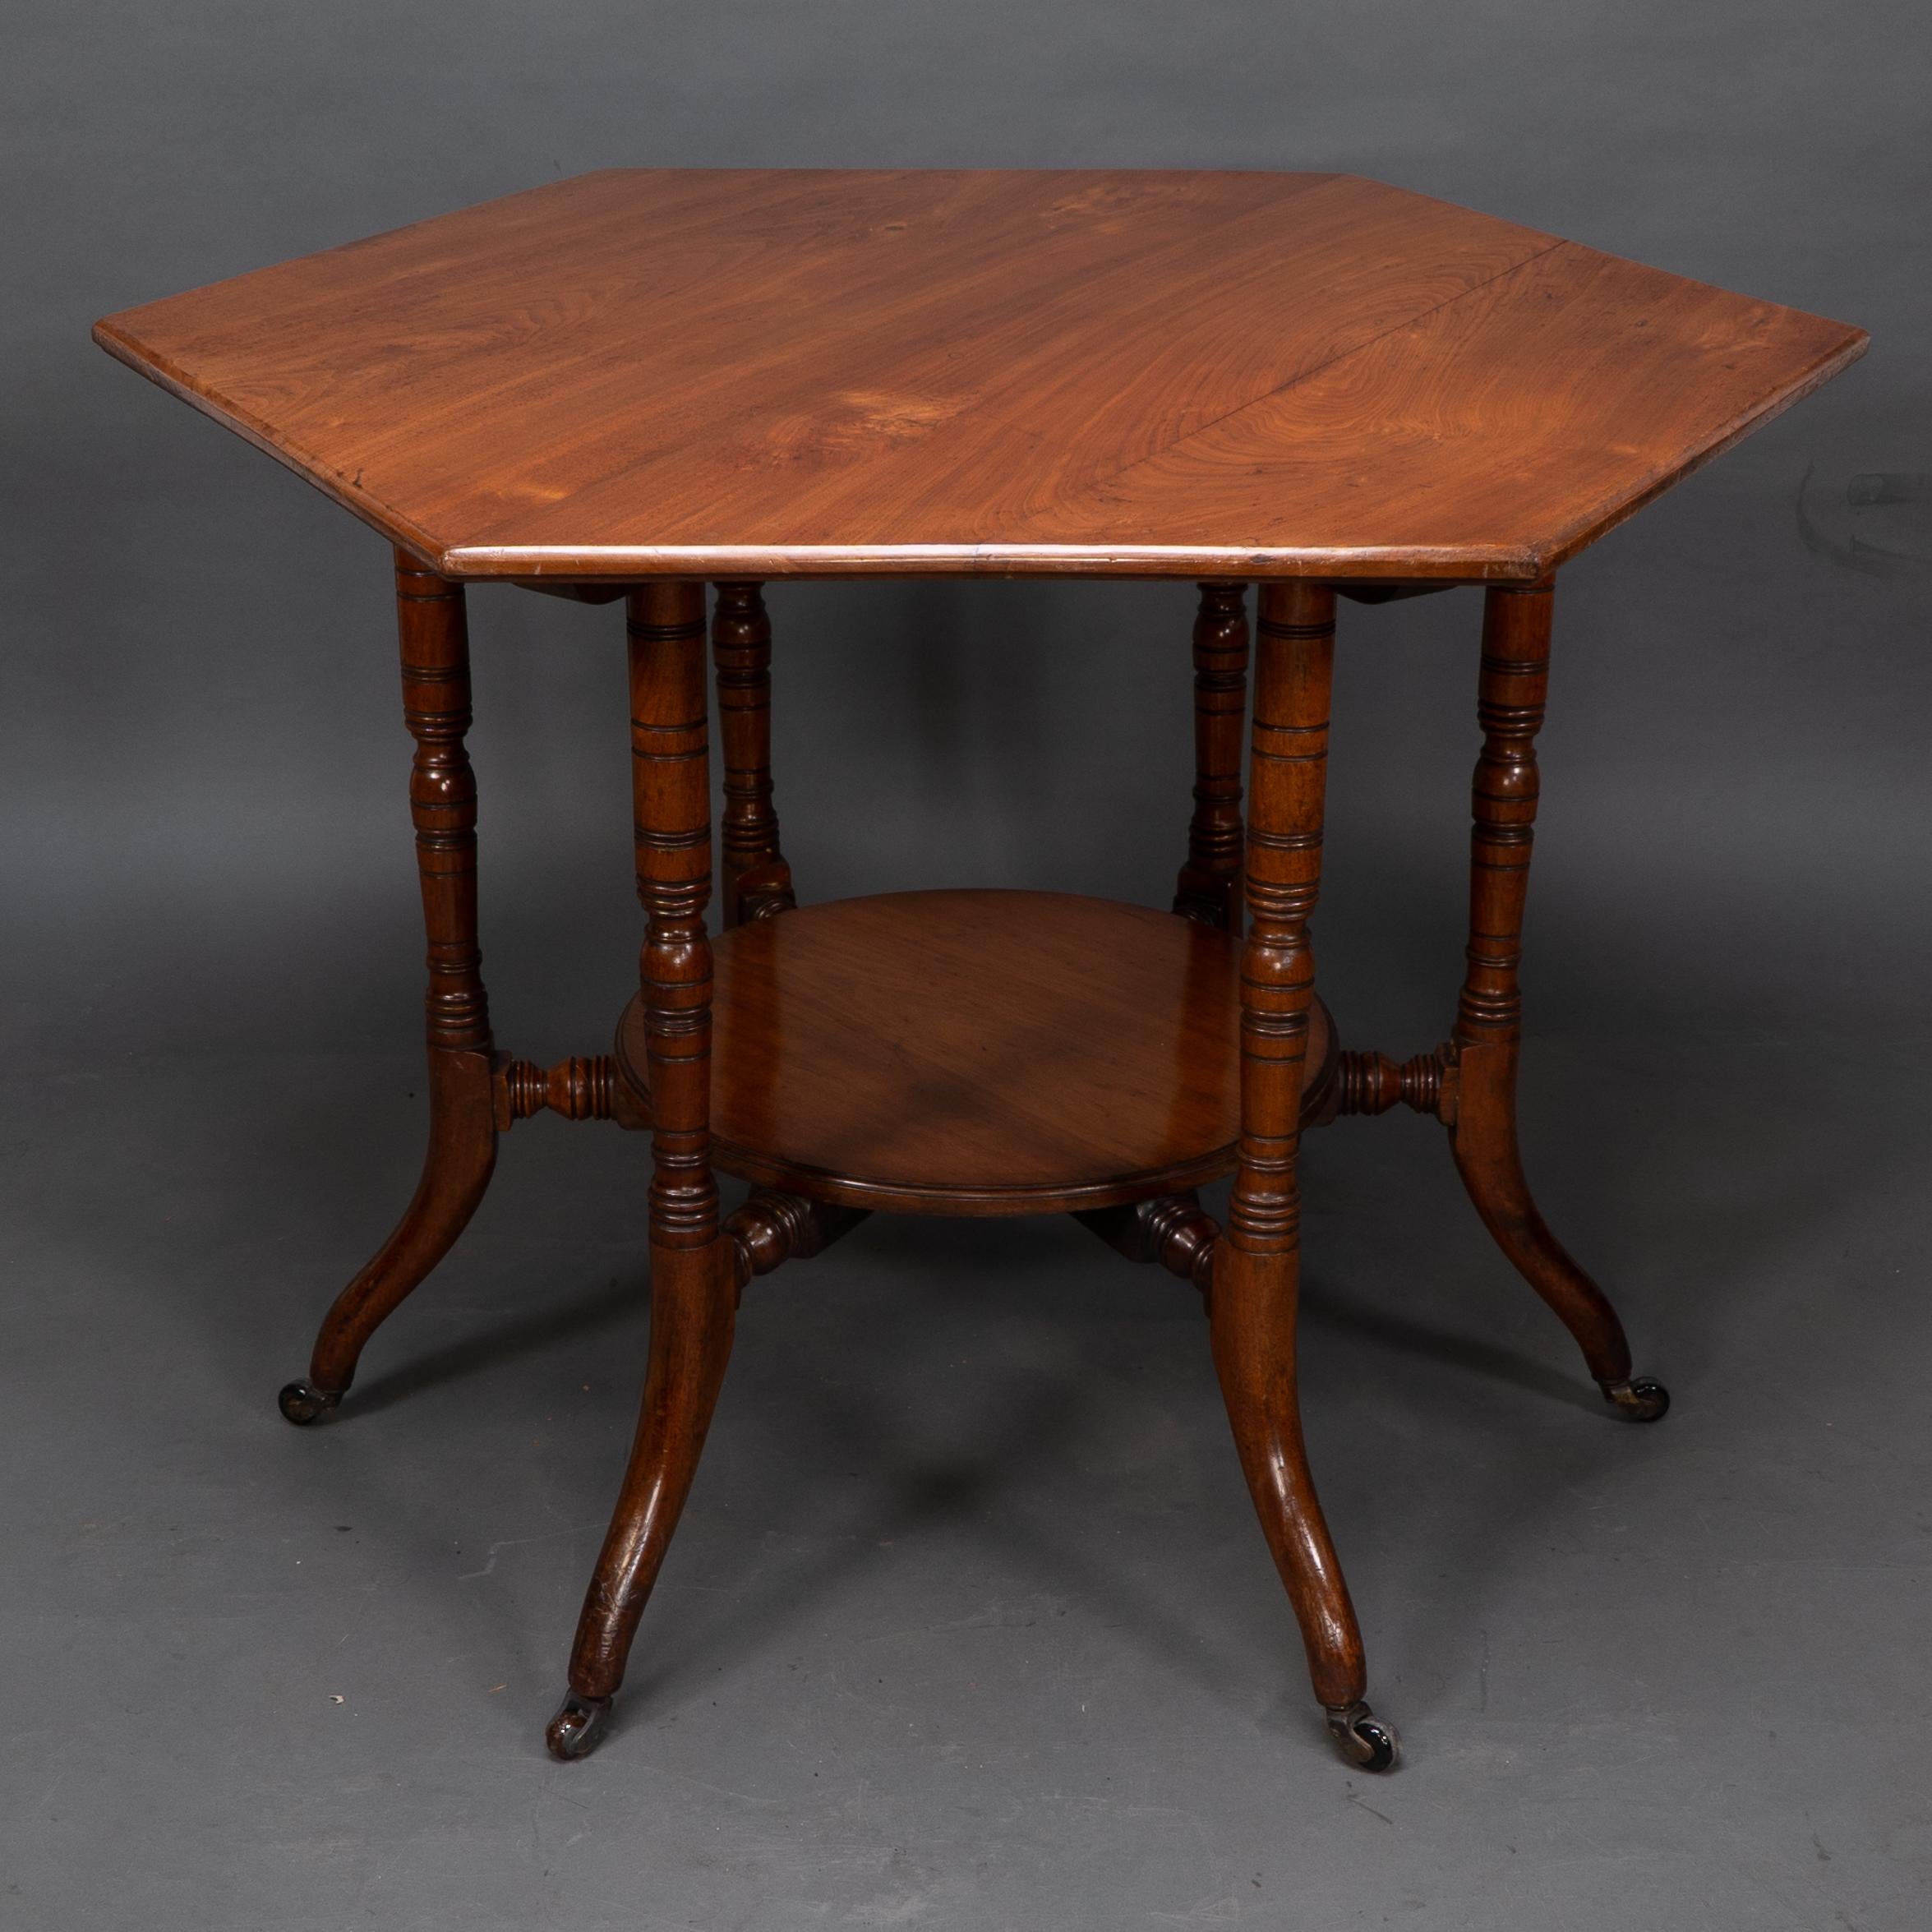 English Collinson & Lock attributed. An Aesthetic Movement walnut octagonal center table For Sale